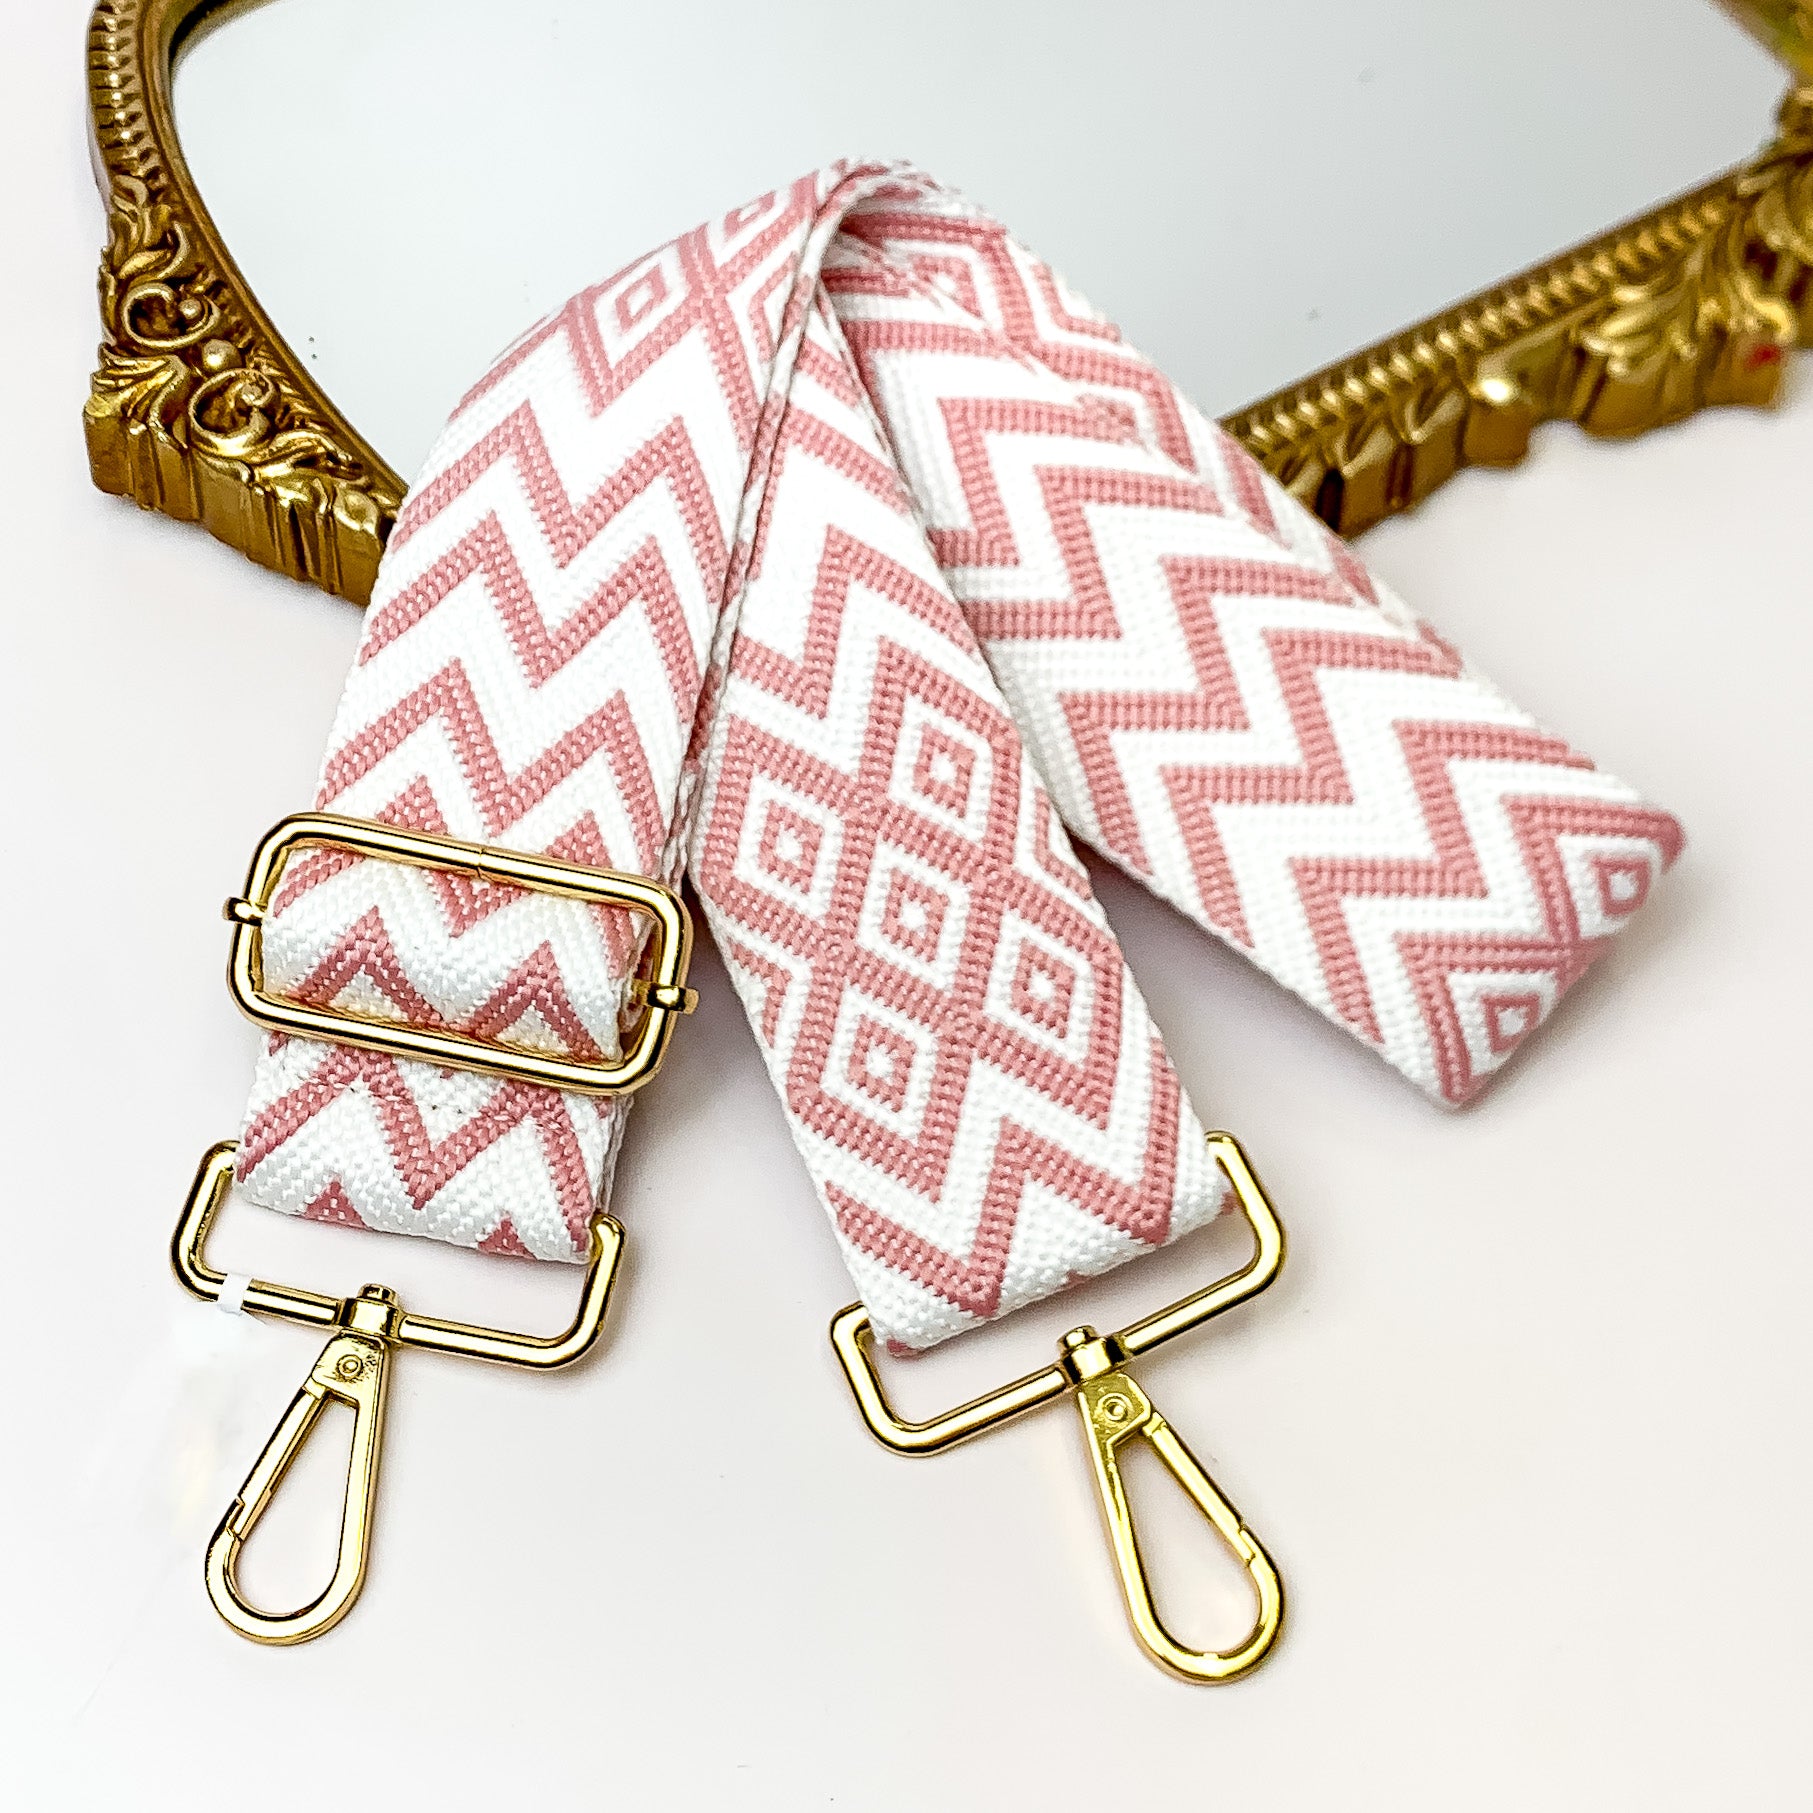 Beaige canvas purse strap with white and baby pink chevron and diamond design. This purse strap includes gold accents. This purse strap is pictured partially on a gold mirror on a white background.